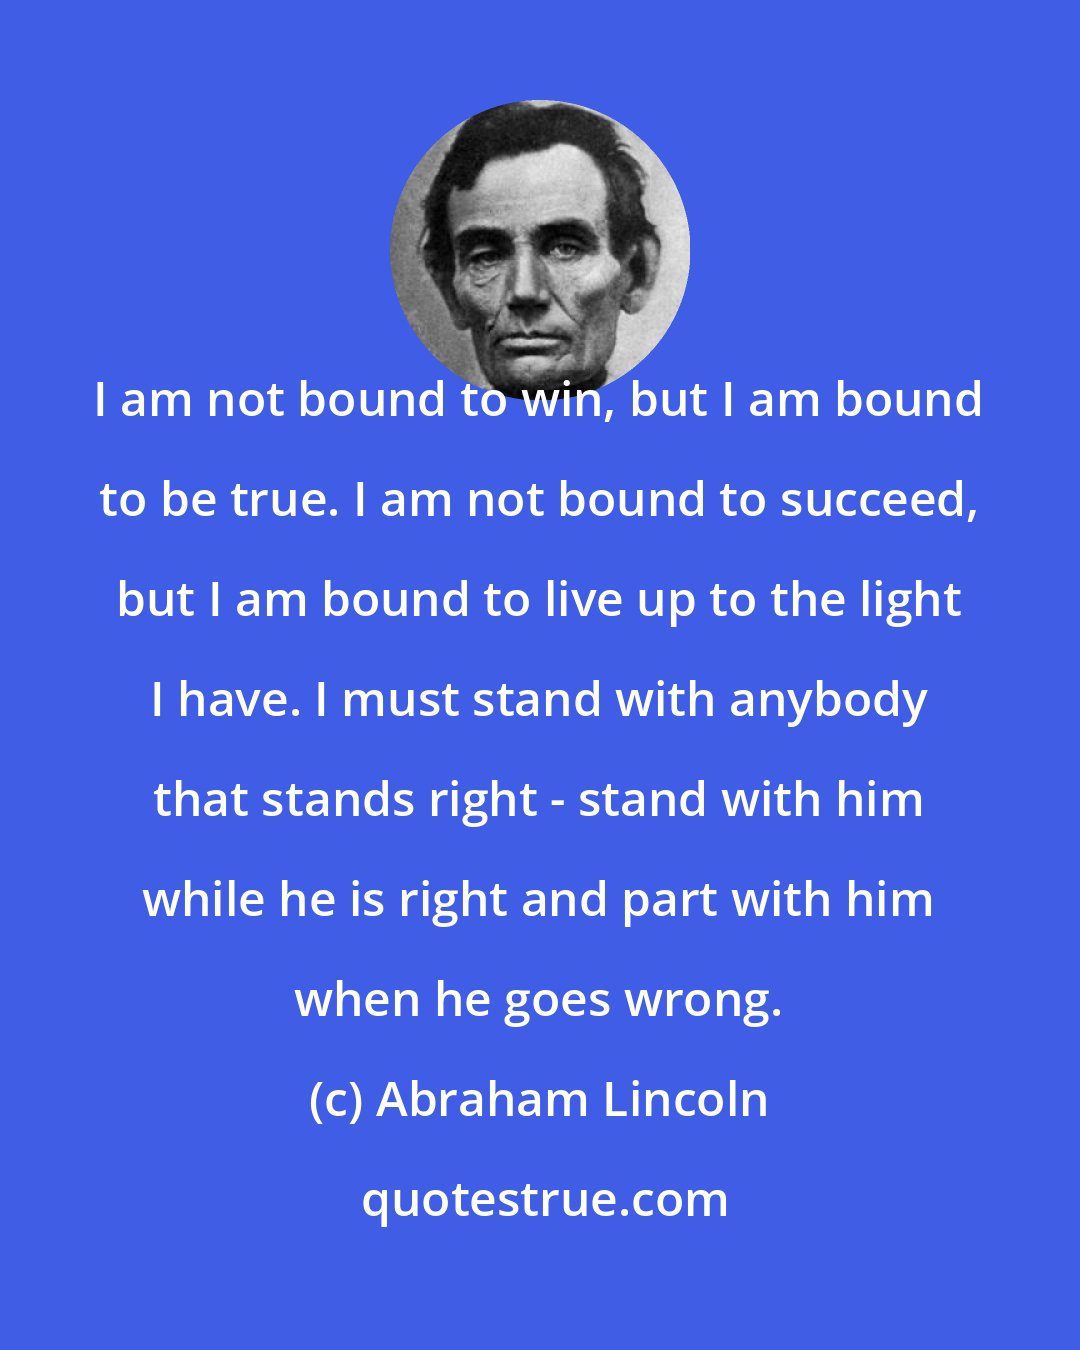 Abraham Lincoln: I am not bound to win, but I am bound to be true. I am not bound to succeed, but I am bound to live up to the light I have. I must stand with anybody that stands right - stand with him while he is right and part with him when he goes wrong.